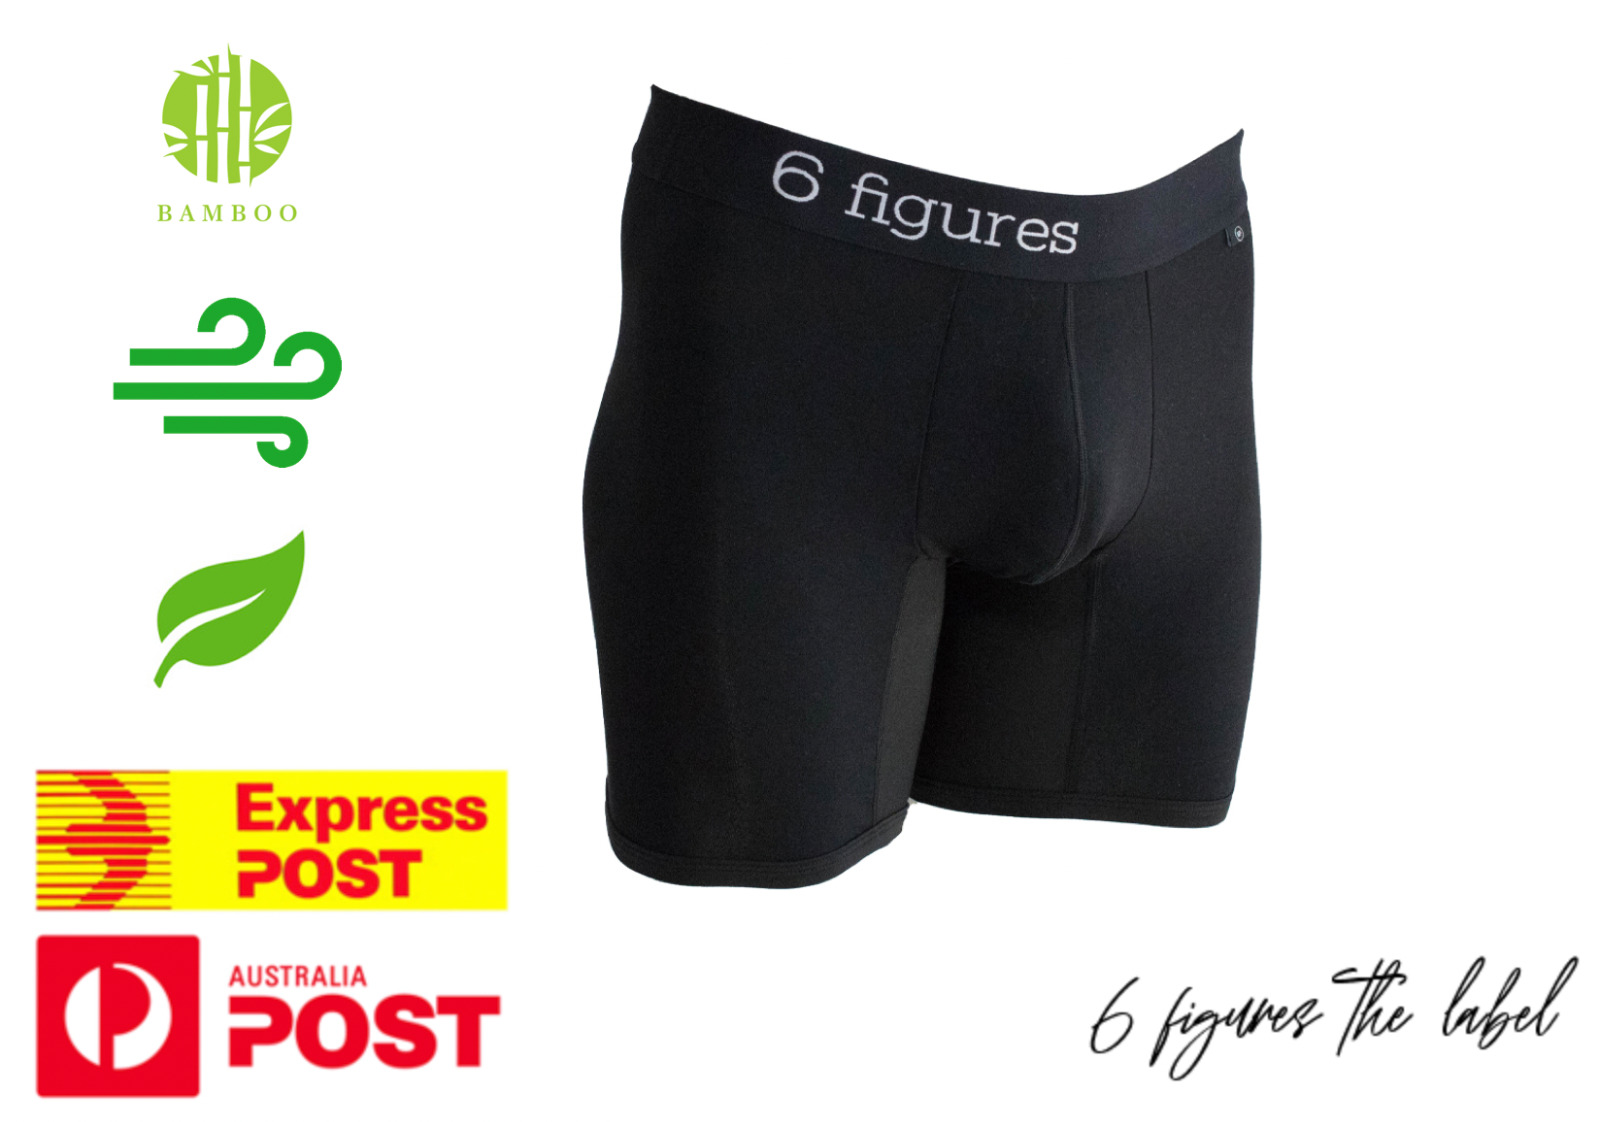 Premium Bamboo Blend Underwear - Experience Unmatched Comfort & Durability